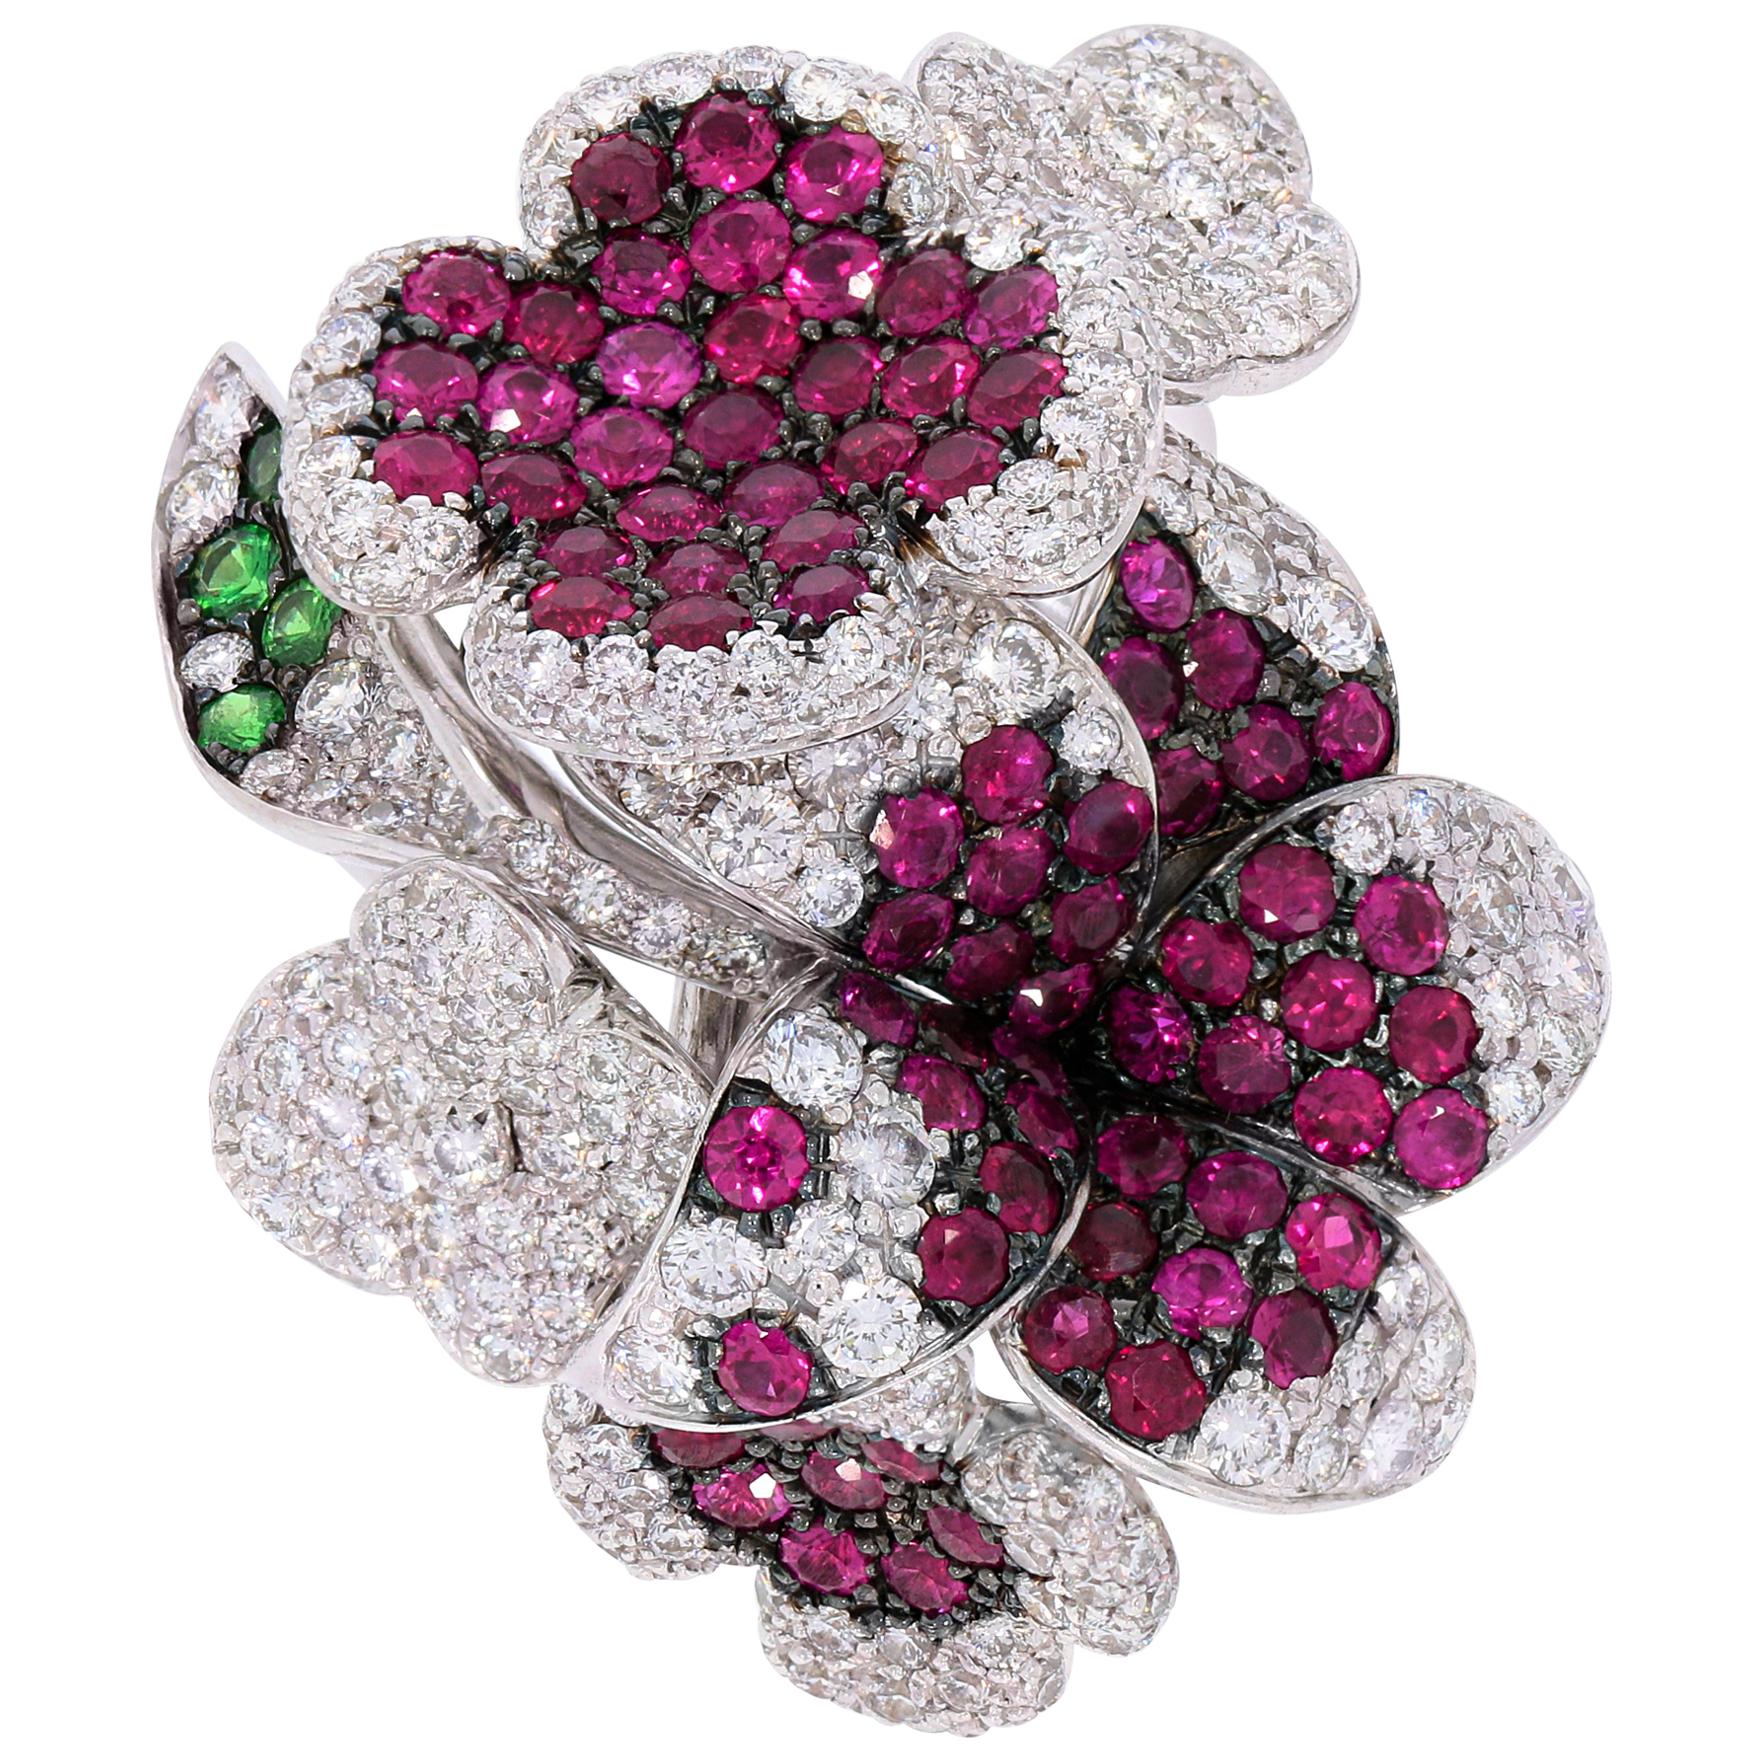 Rosior one-off Ruby and Diamond "Flower" Cocktail Ring set in White Gold